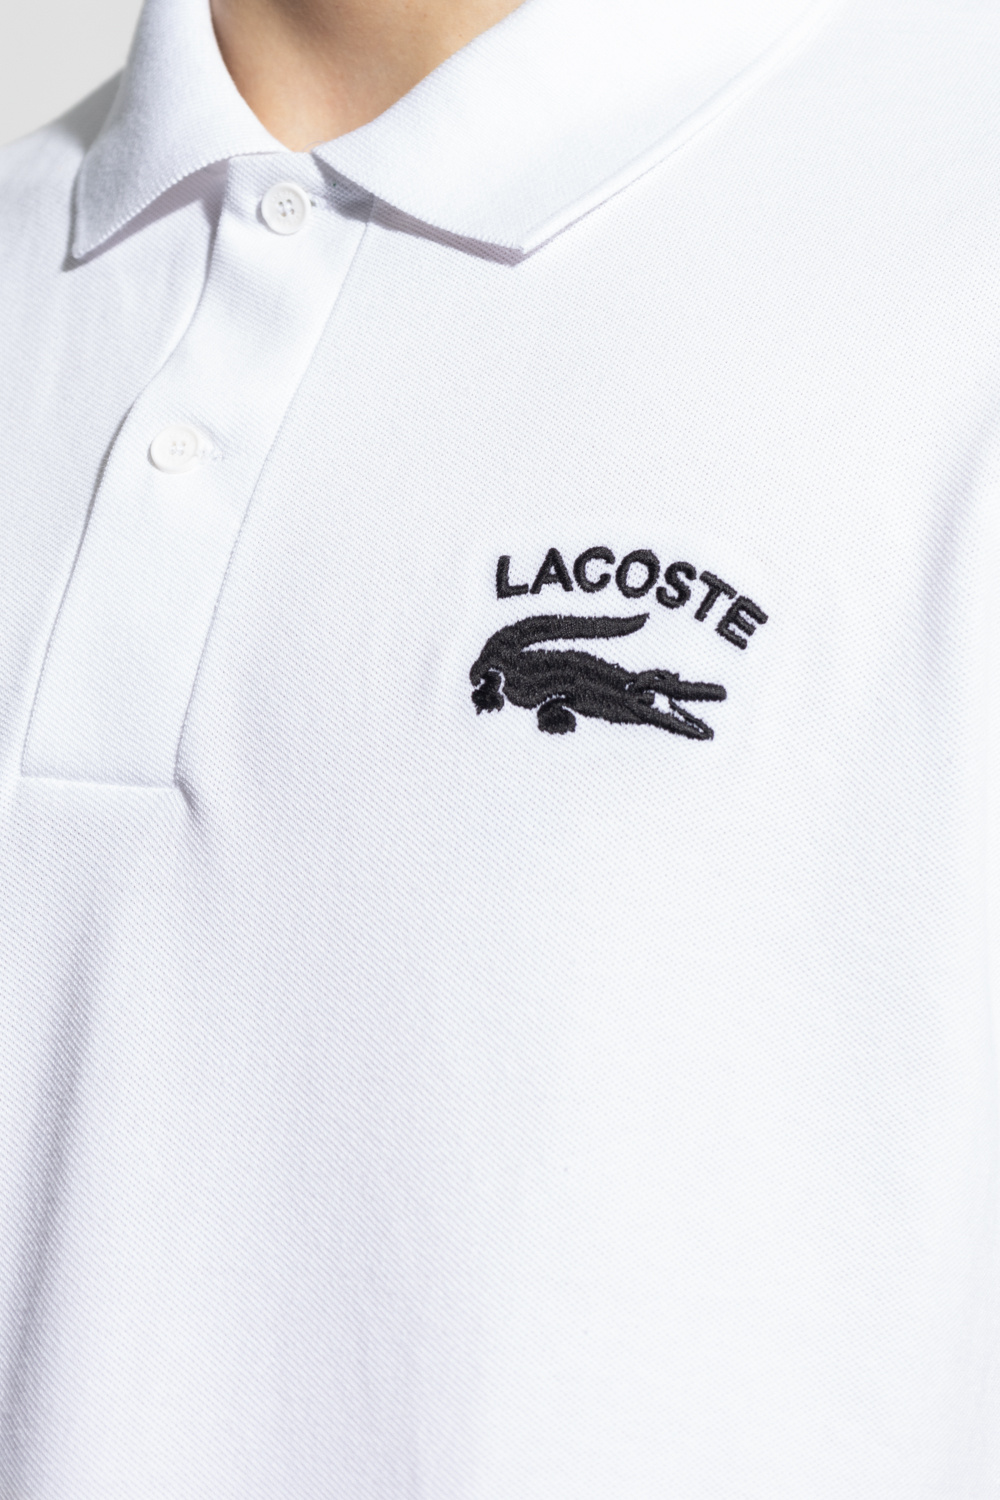 GenesinlifeShops Italy - accessories Lacoste - shirts office 